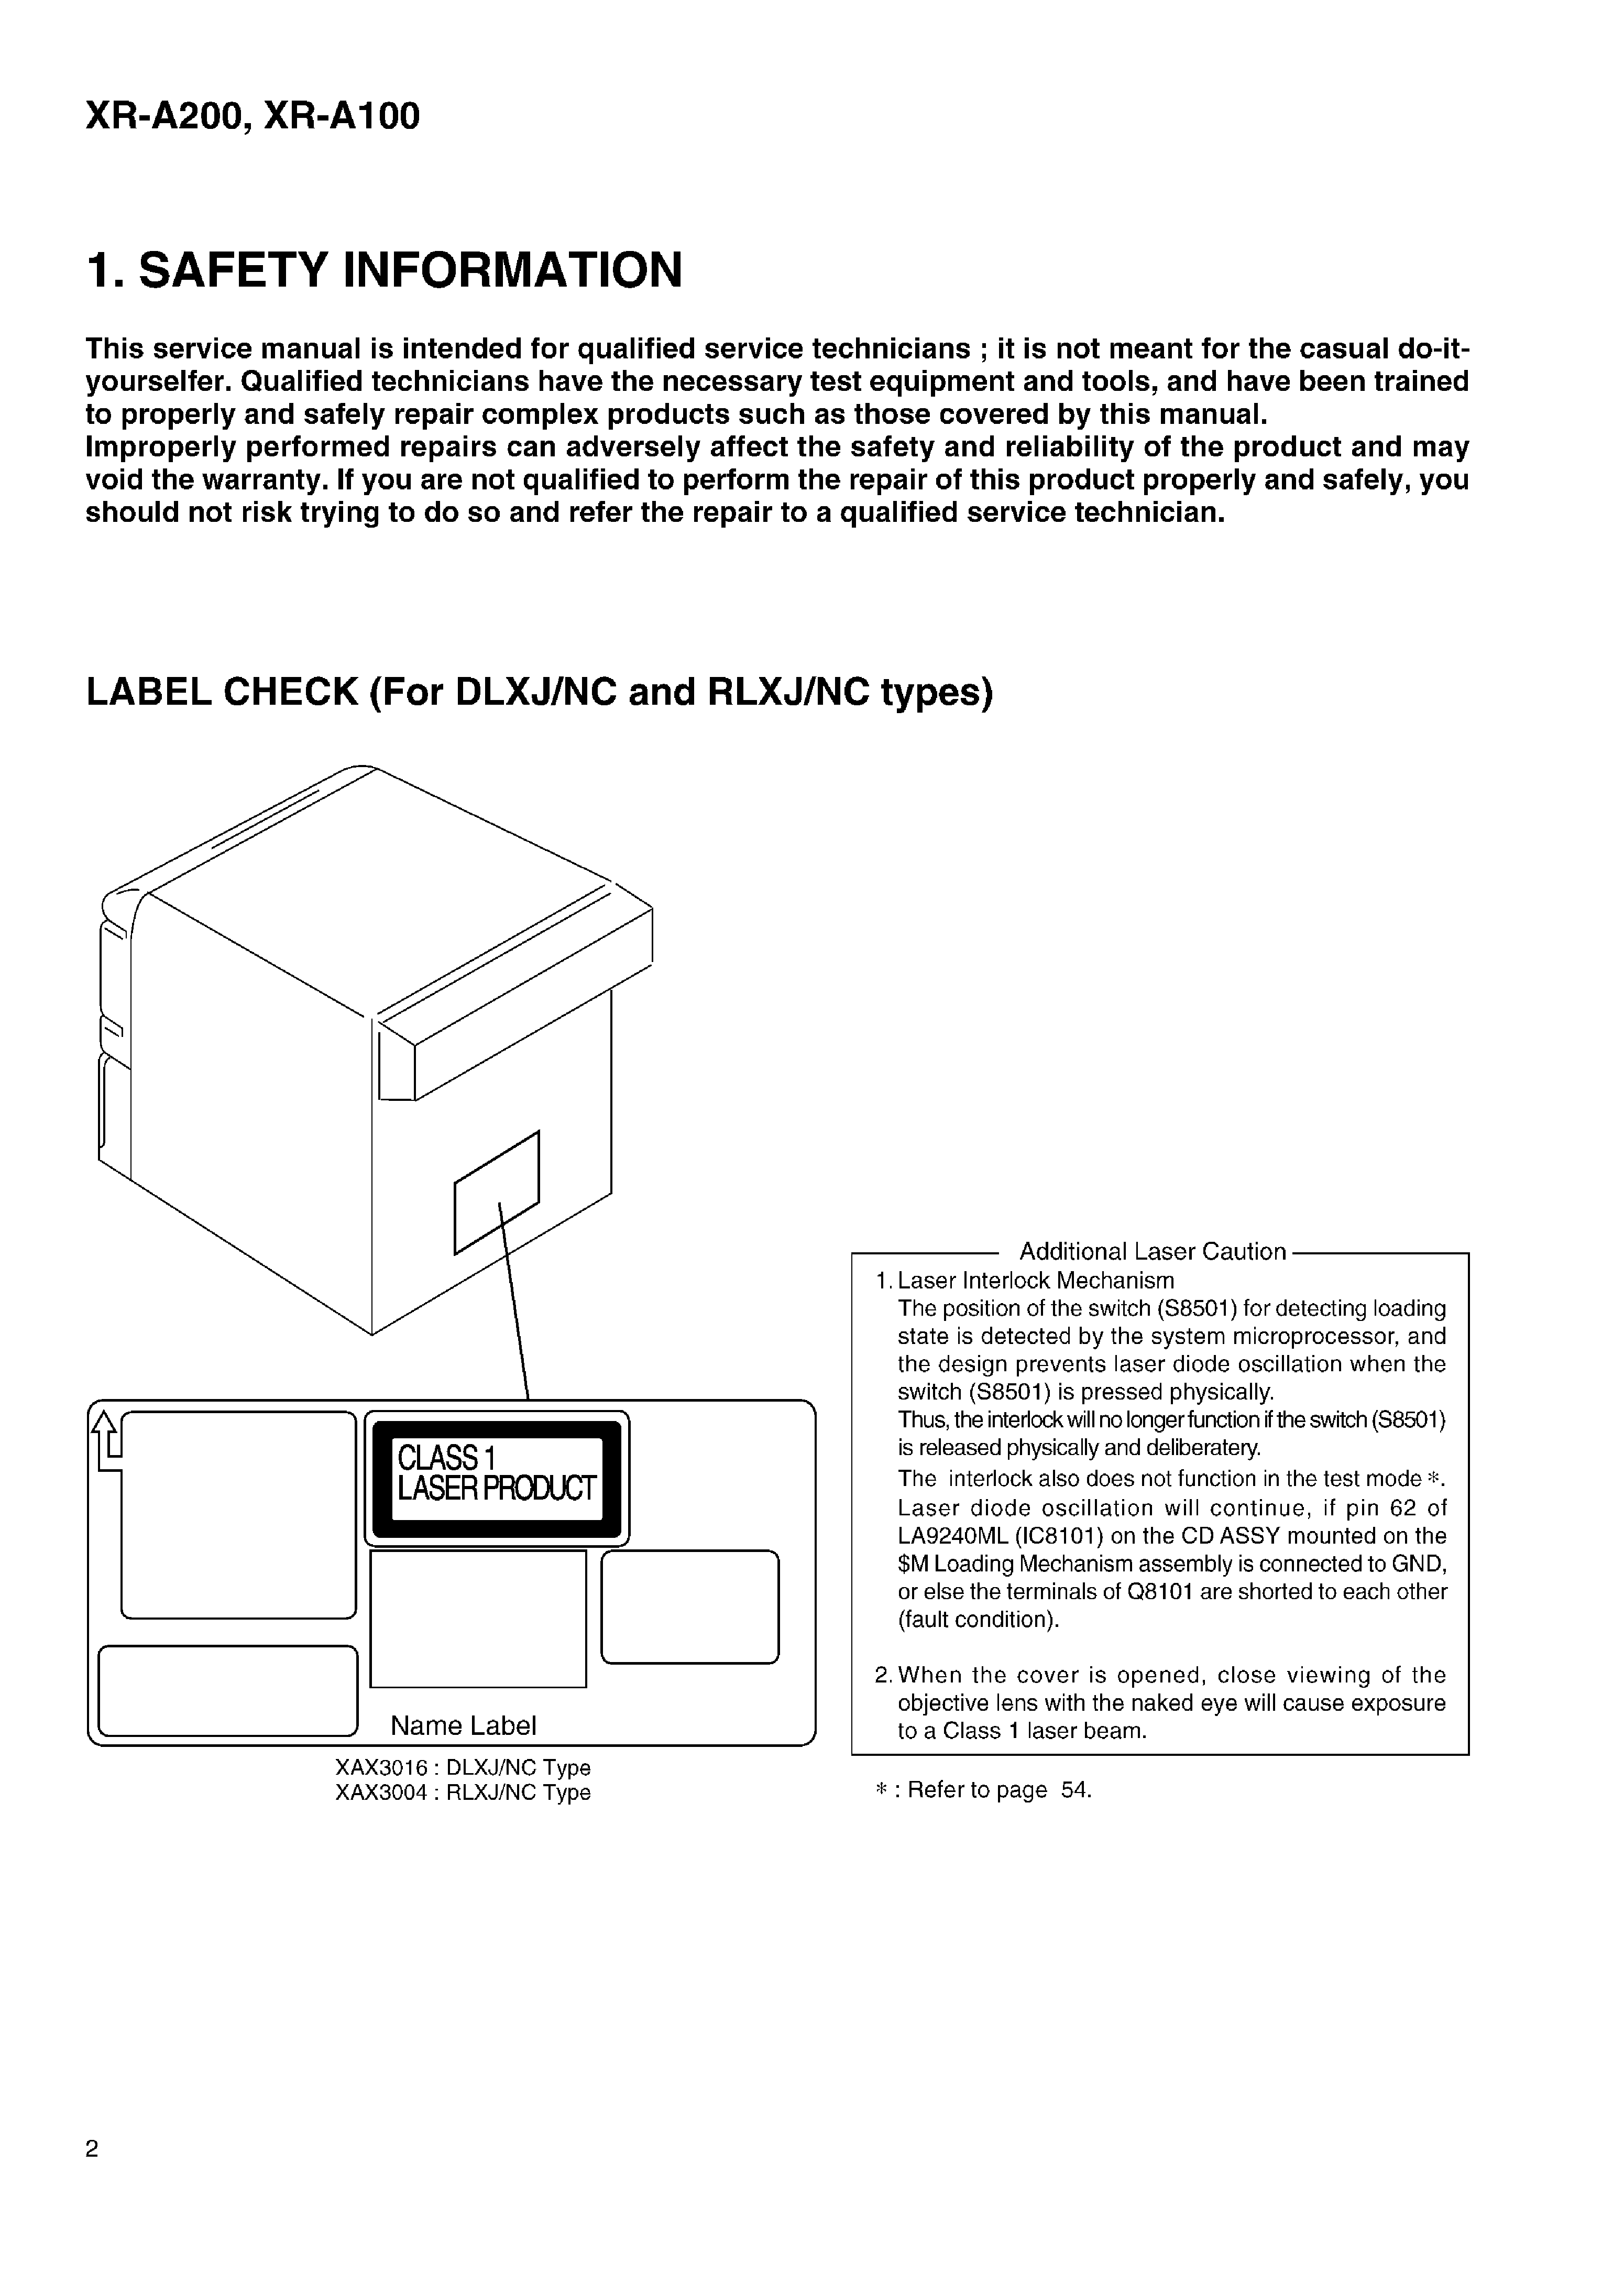 PIONEER XR-A100 A200 service manual (2nd page)